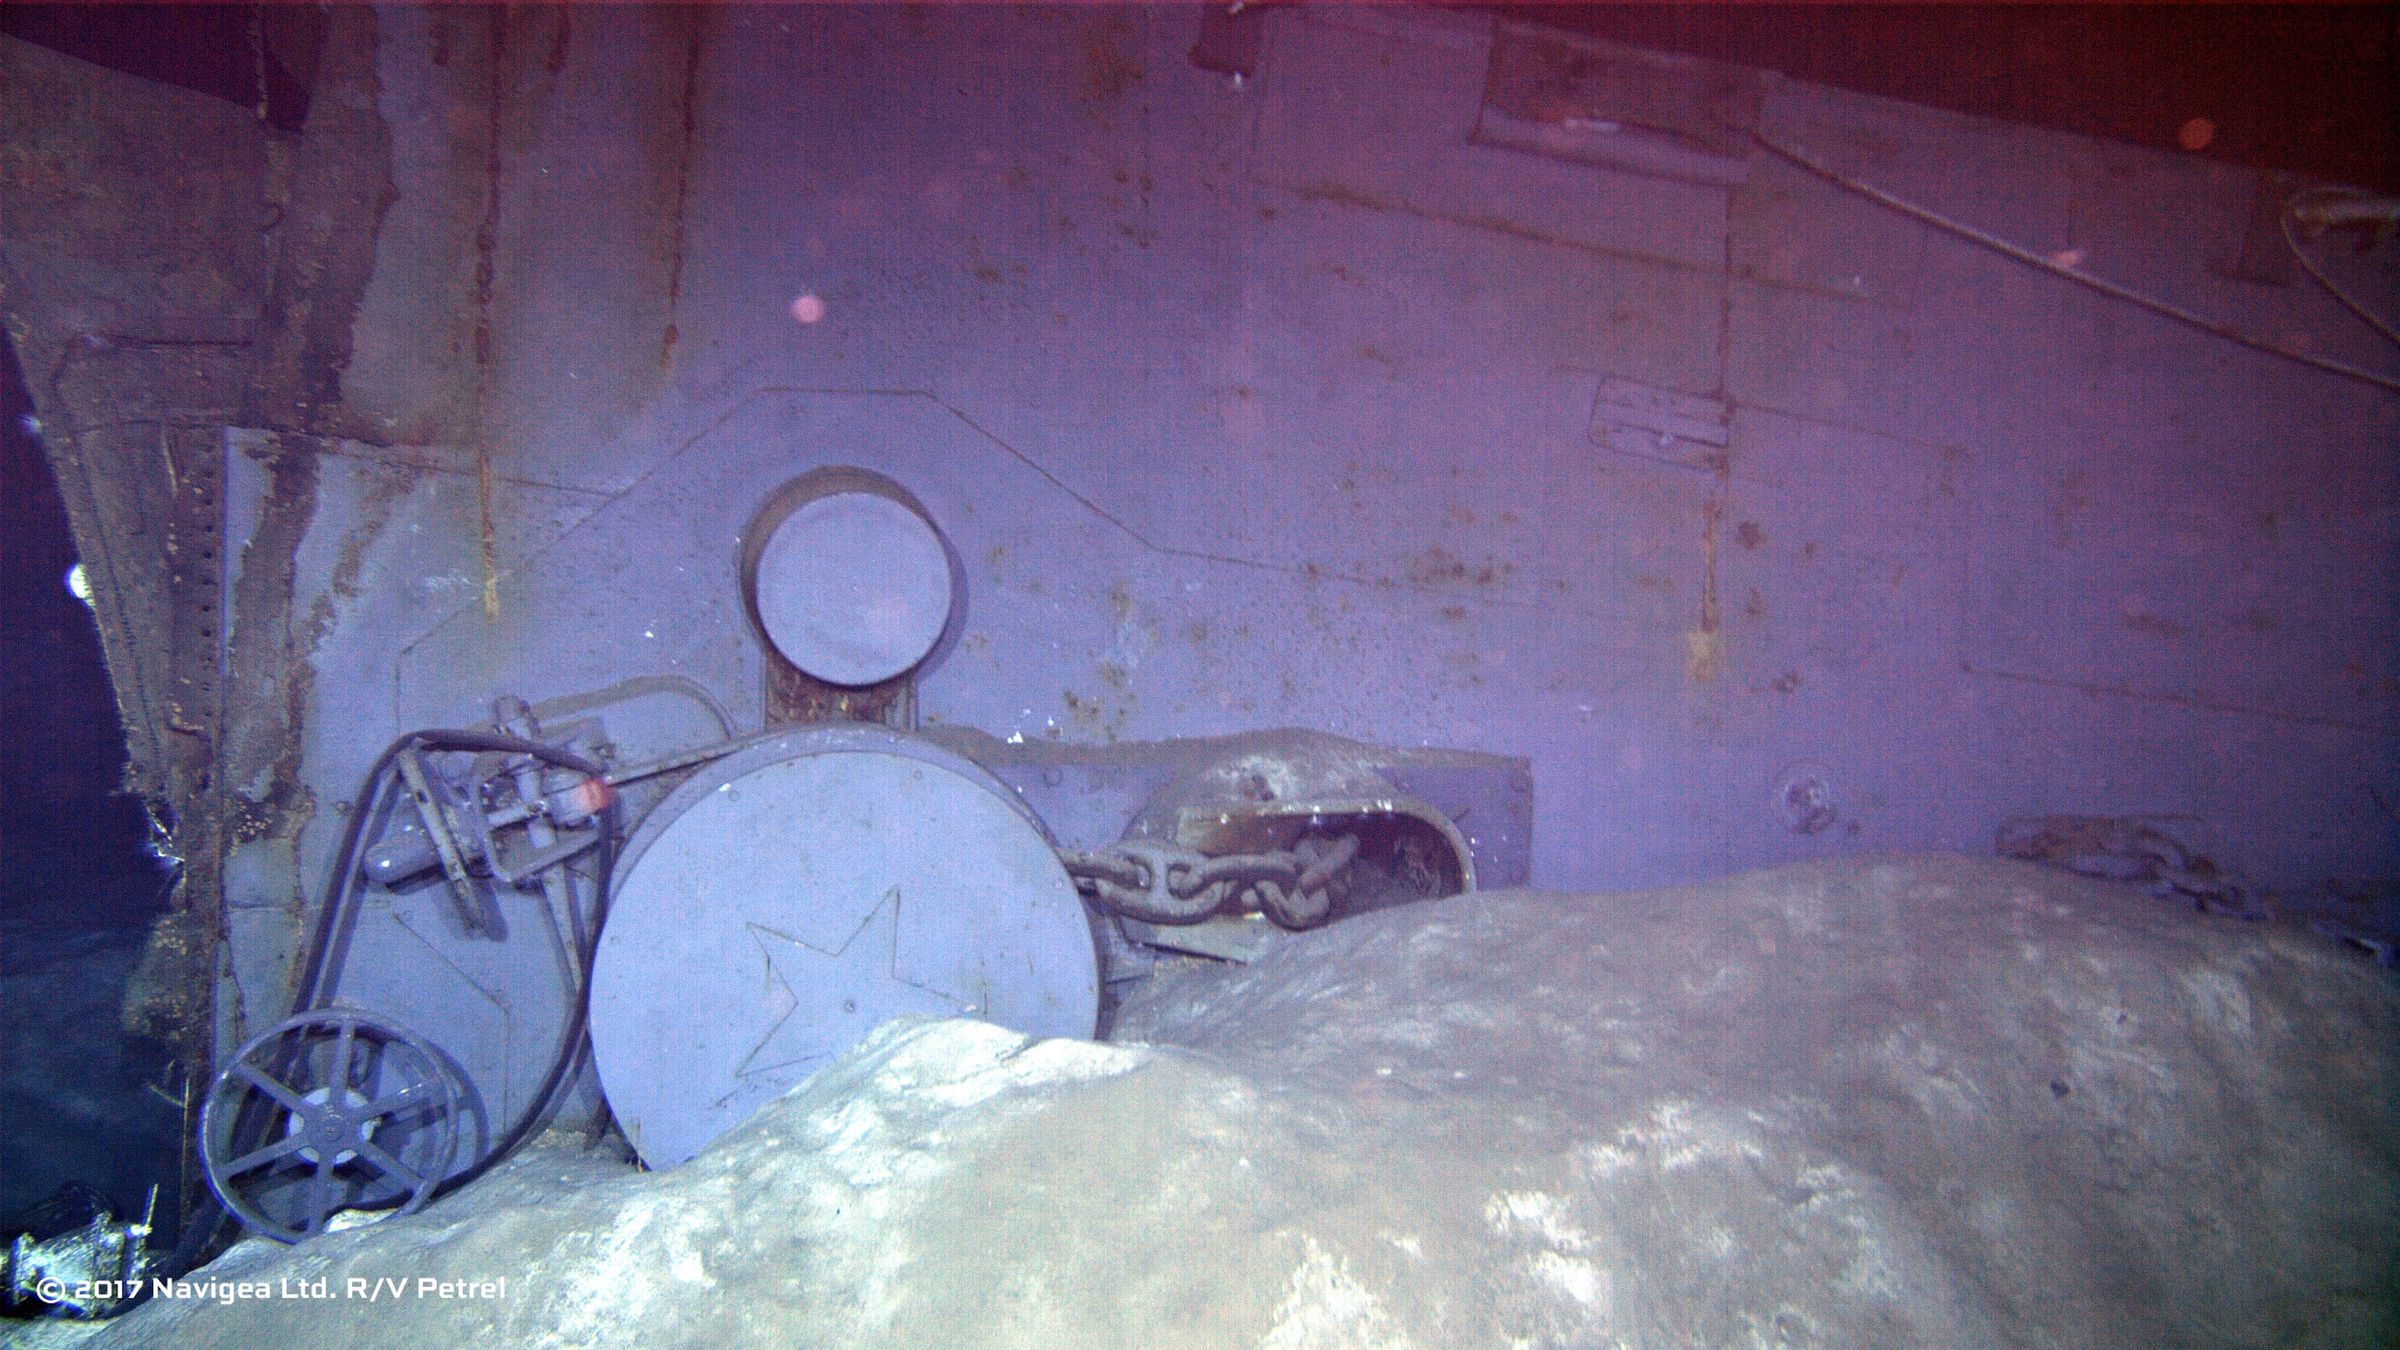 An image shot from a remotely operated vehicle shows wreckage which appears to be one of the two anchor windlass mechanisms from the forecastle of the ship. 